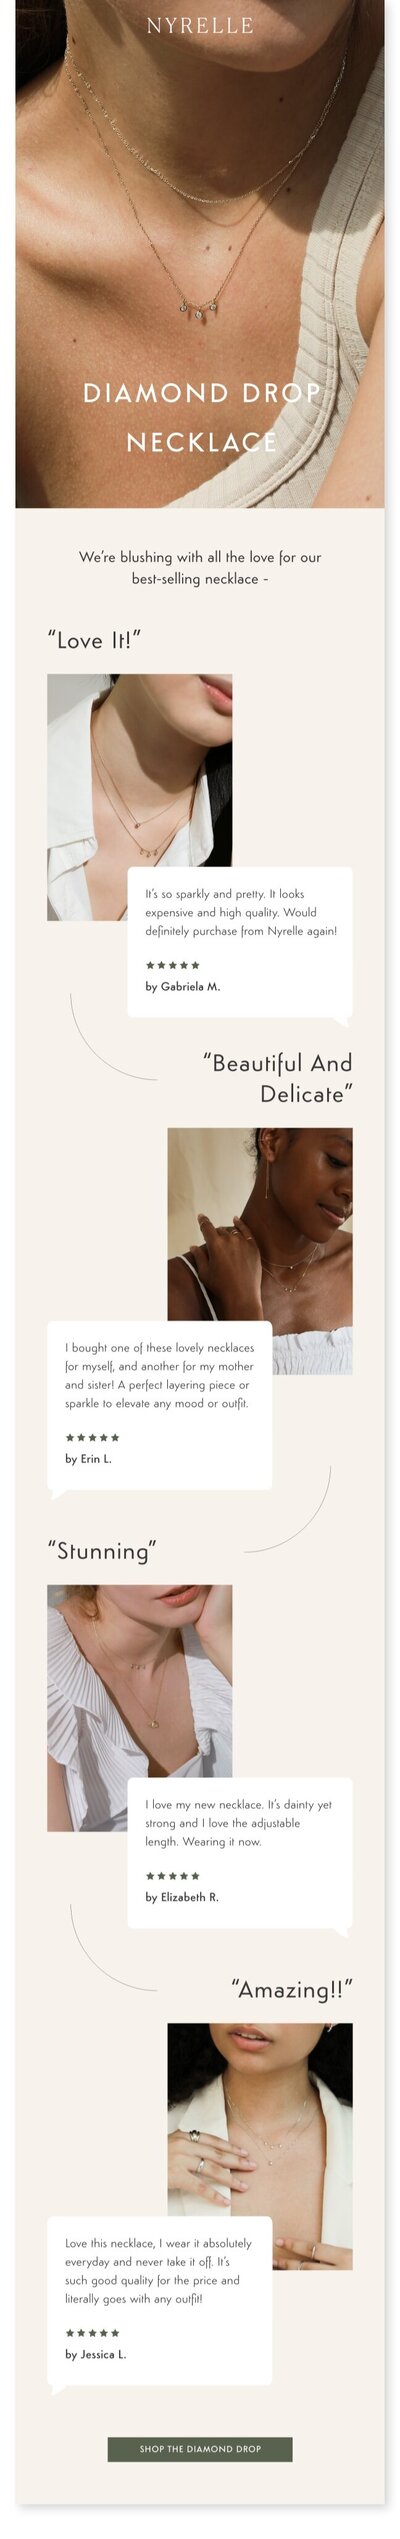 E-commerce Email Campaign Design by Graphic Design Expert in Hong Kong Kyra Janelle Featuring Customer Reviews of NYRELLE's Best-Selling Diamond Drop Necklace.